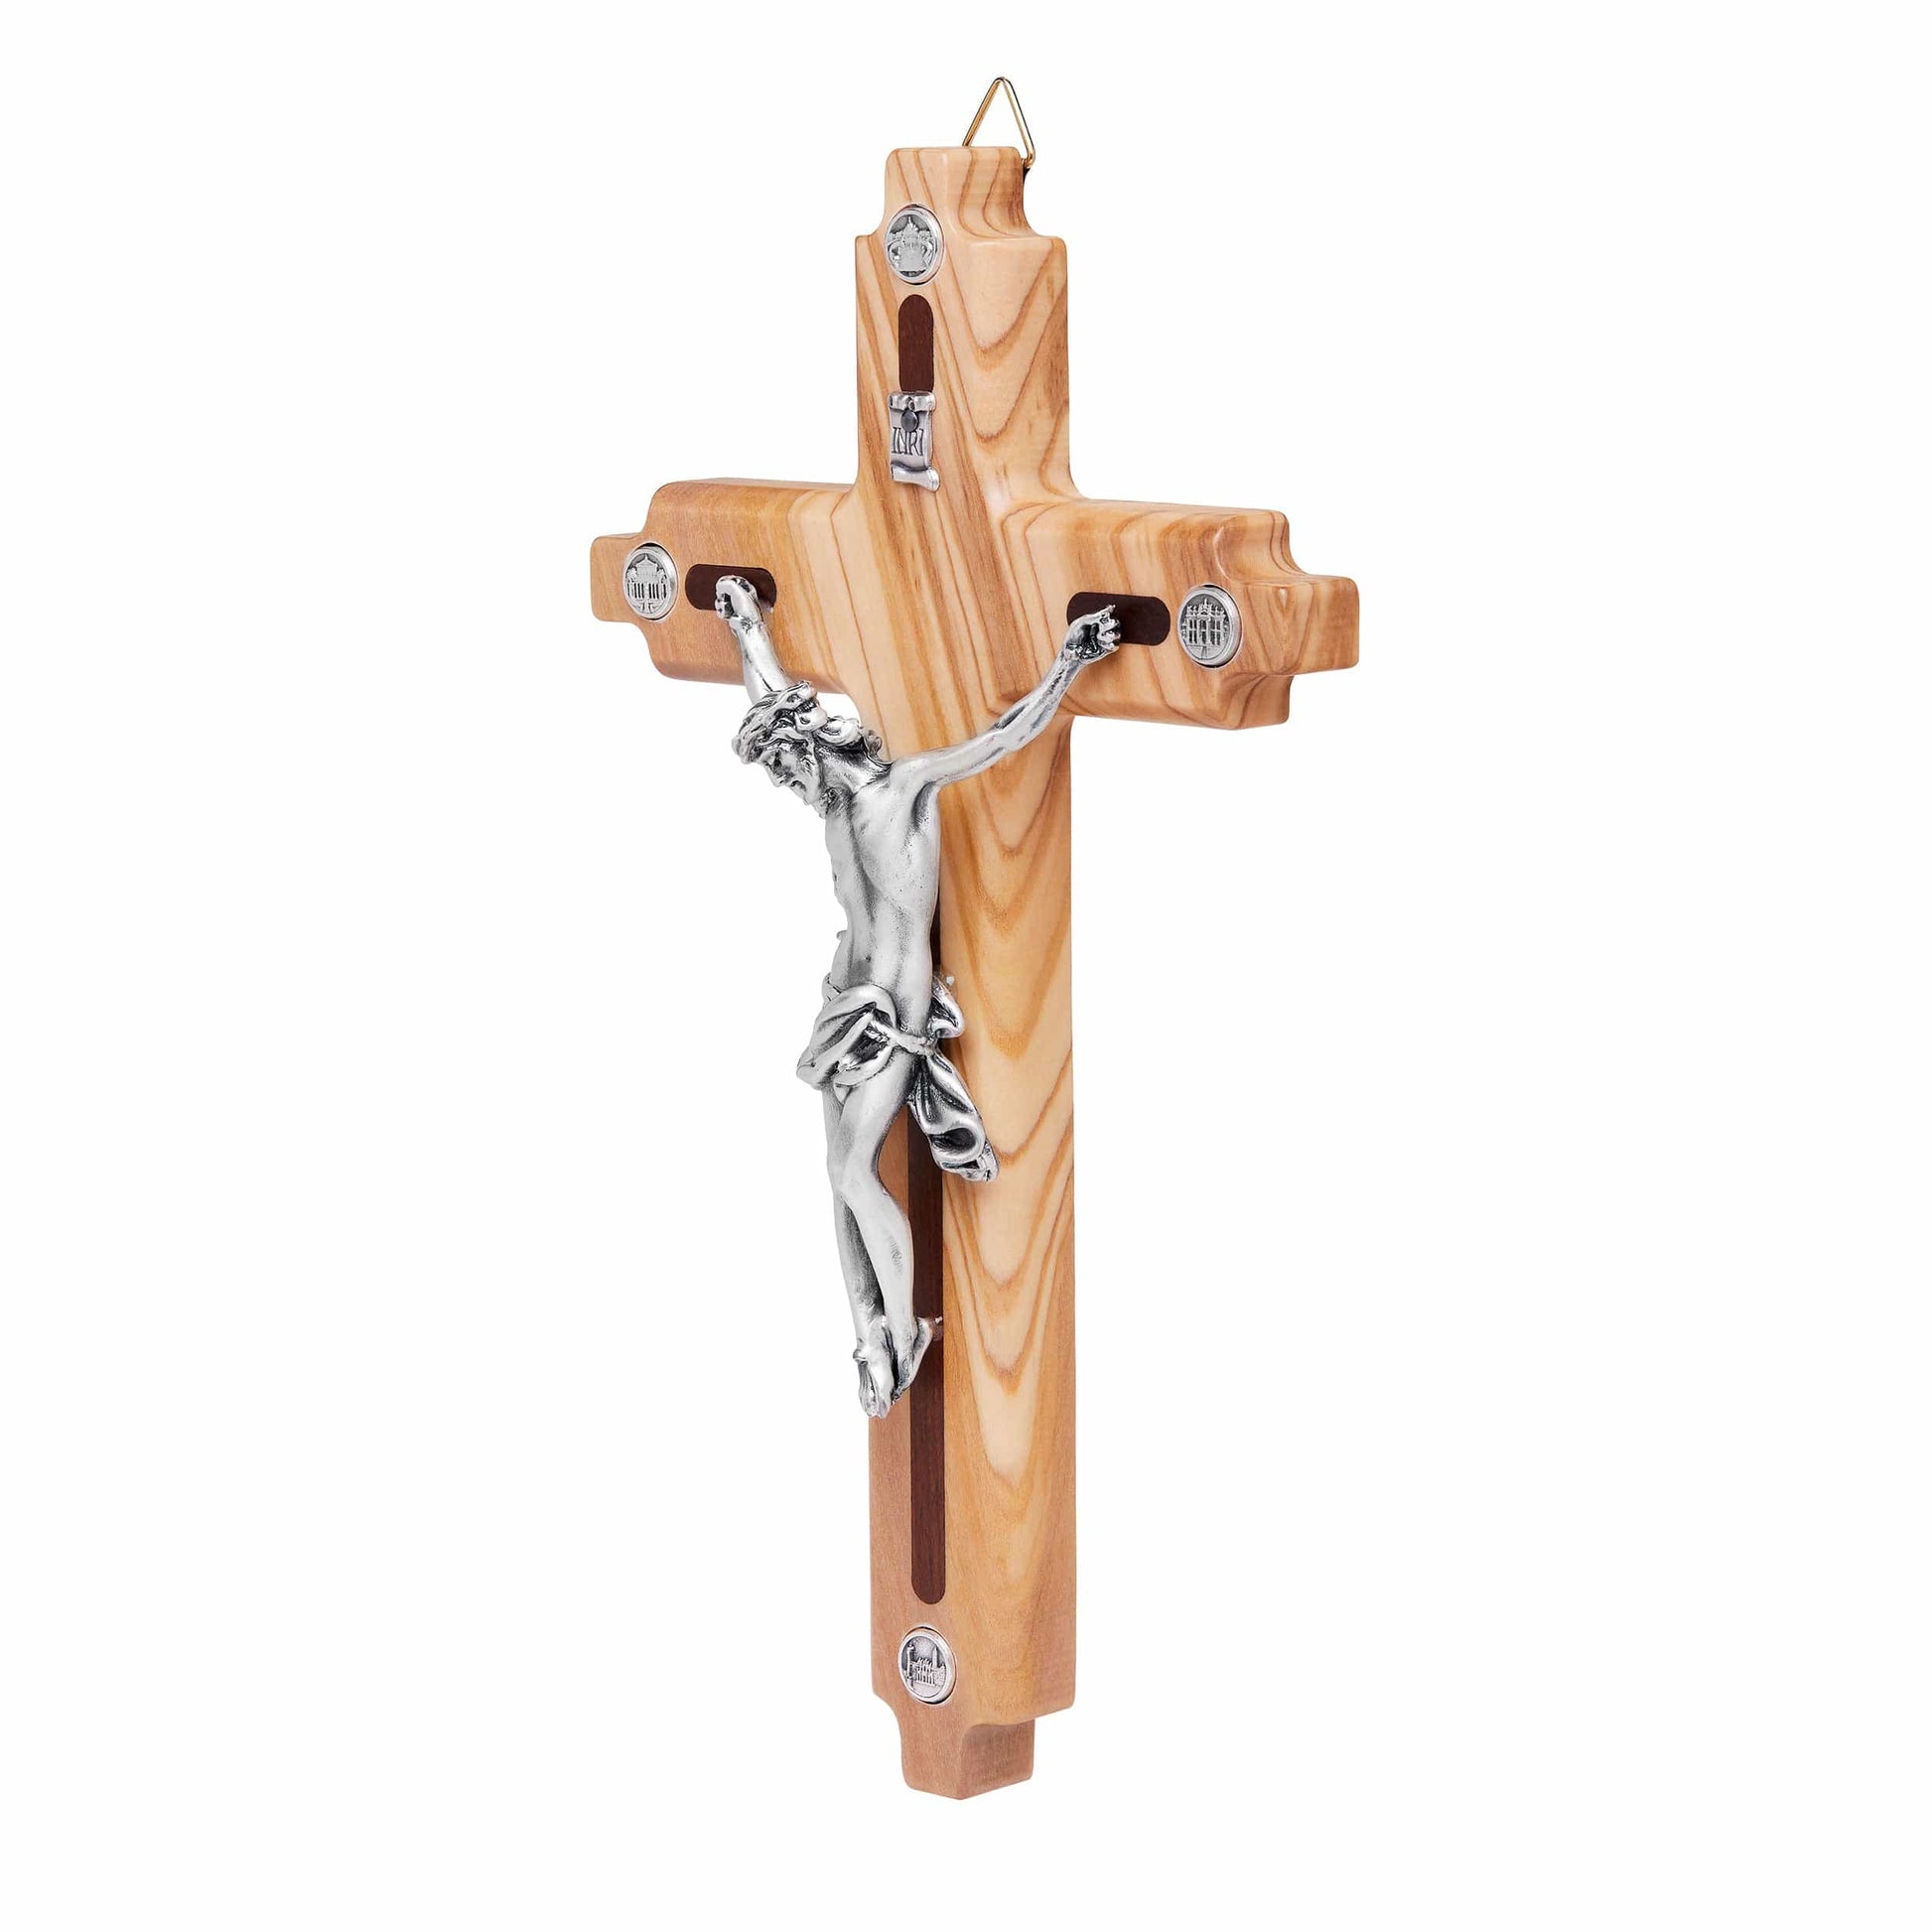 MONDO CATTOLICO 19 cm (7.48 in) Olive Wood Crucifix With the Four Roman Basilicas Medals